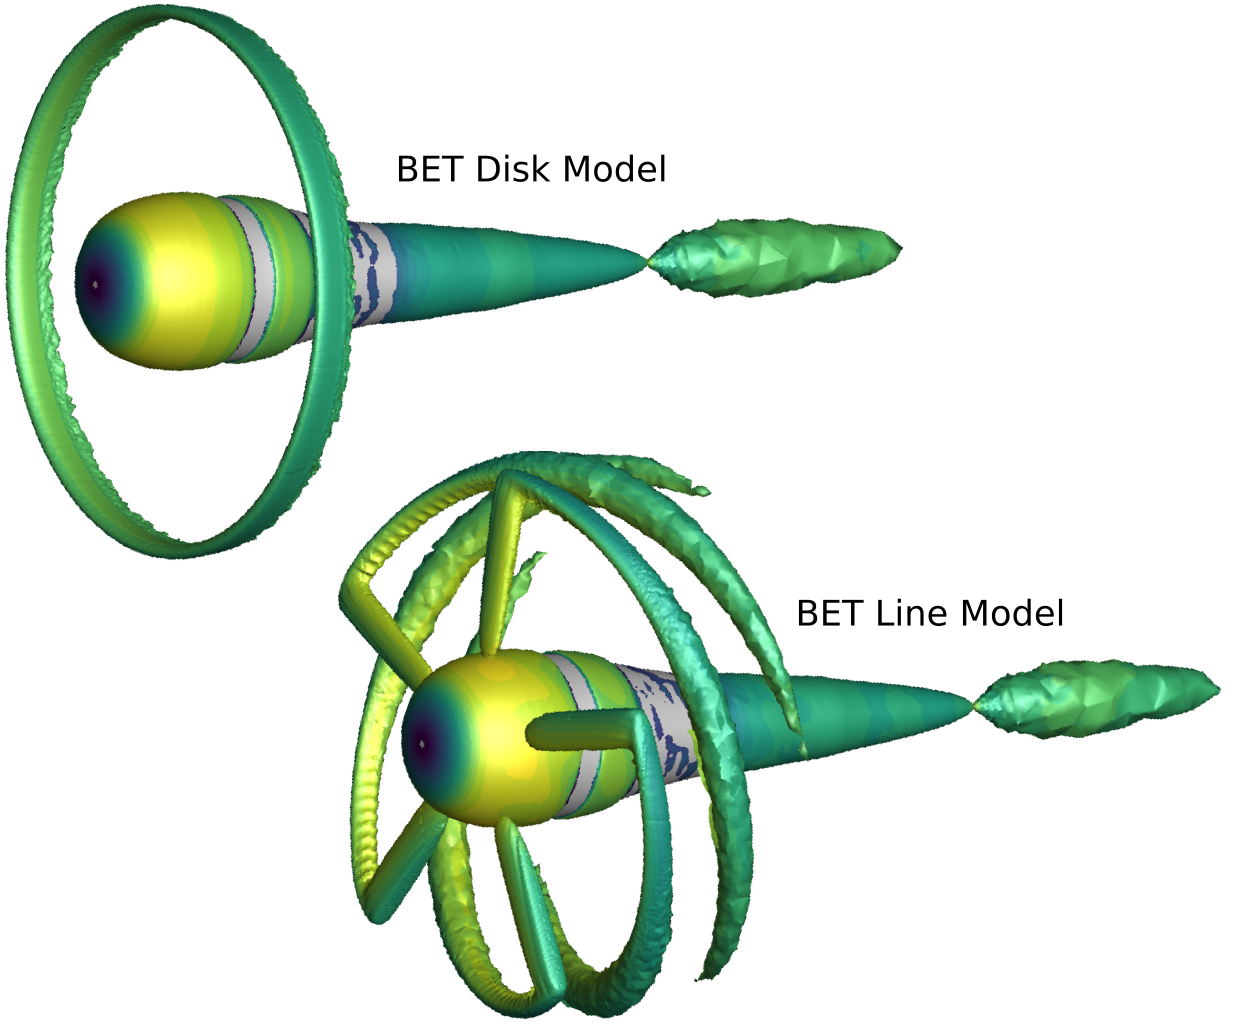 An example rotor simulation showcasing the characteristic flow profiles in BET Disk and BET Line models